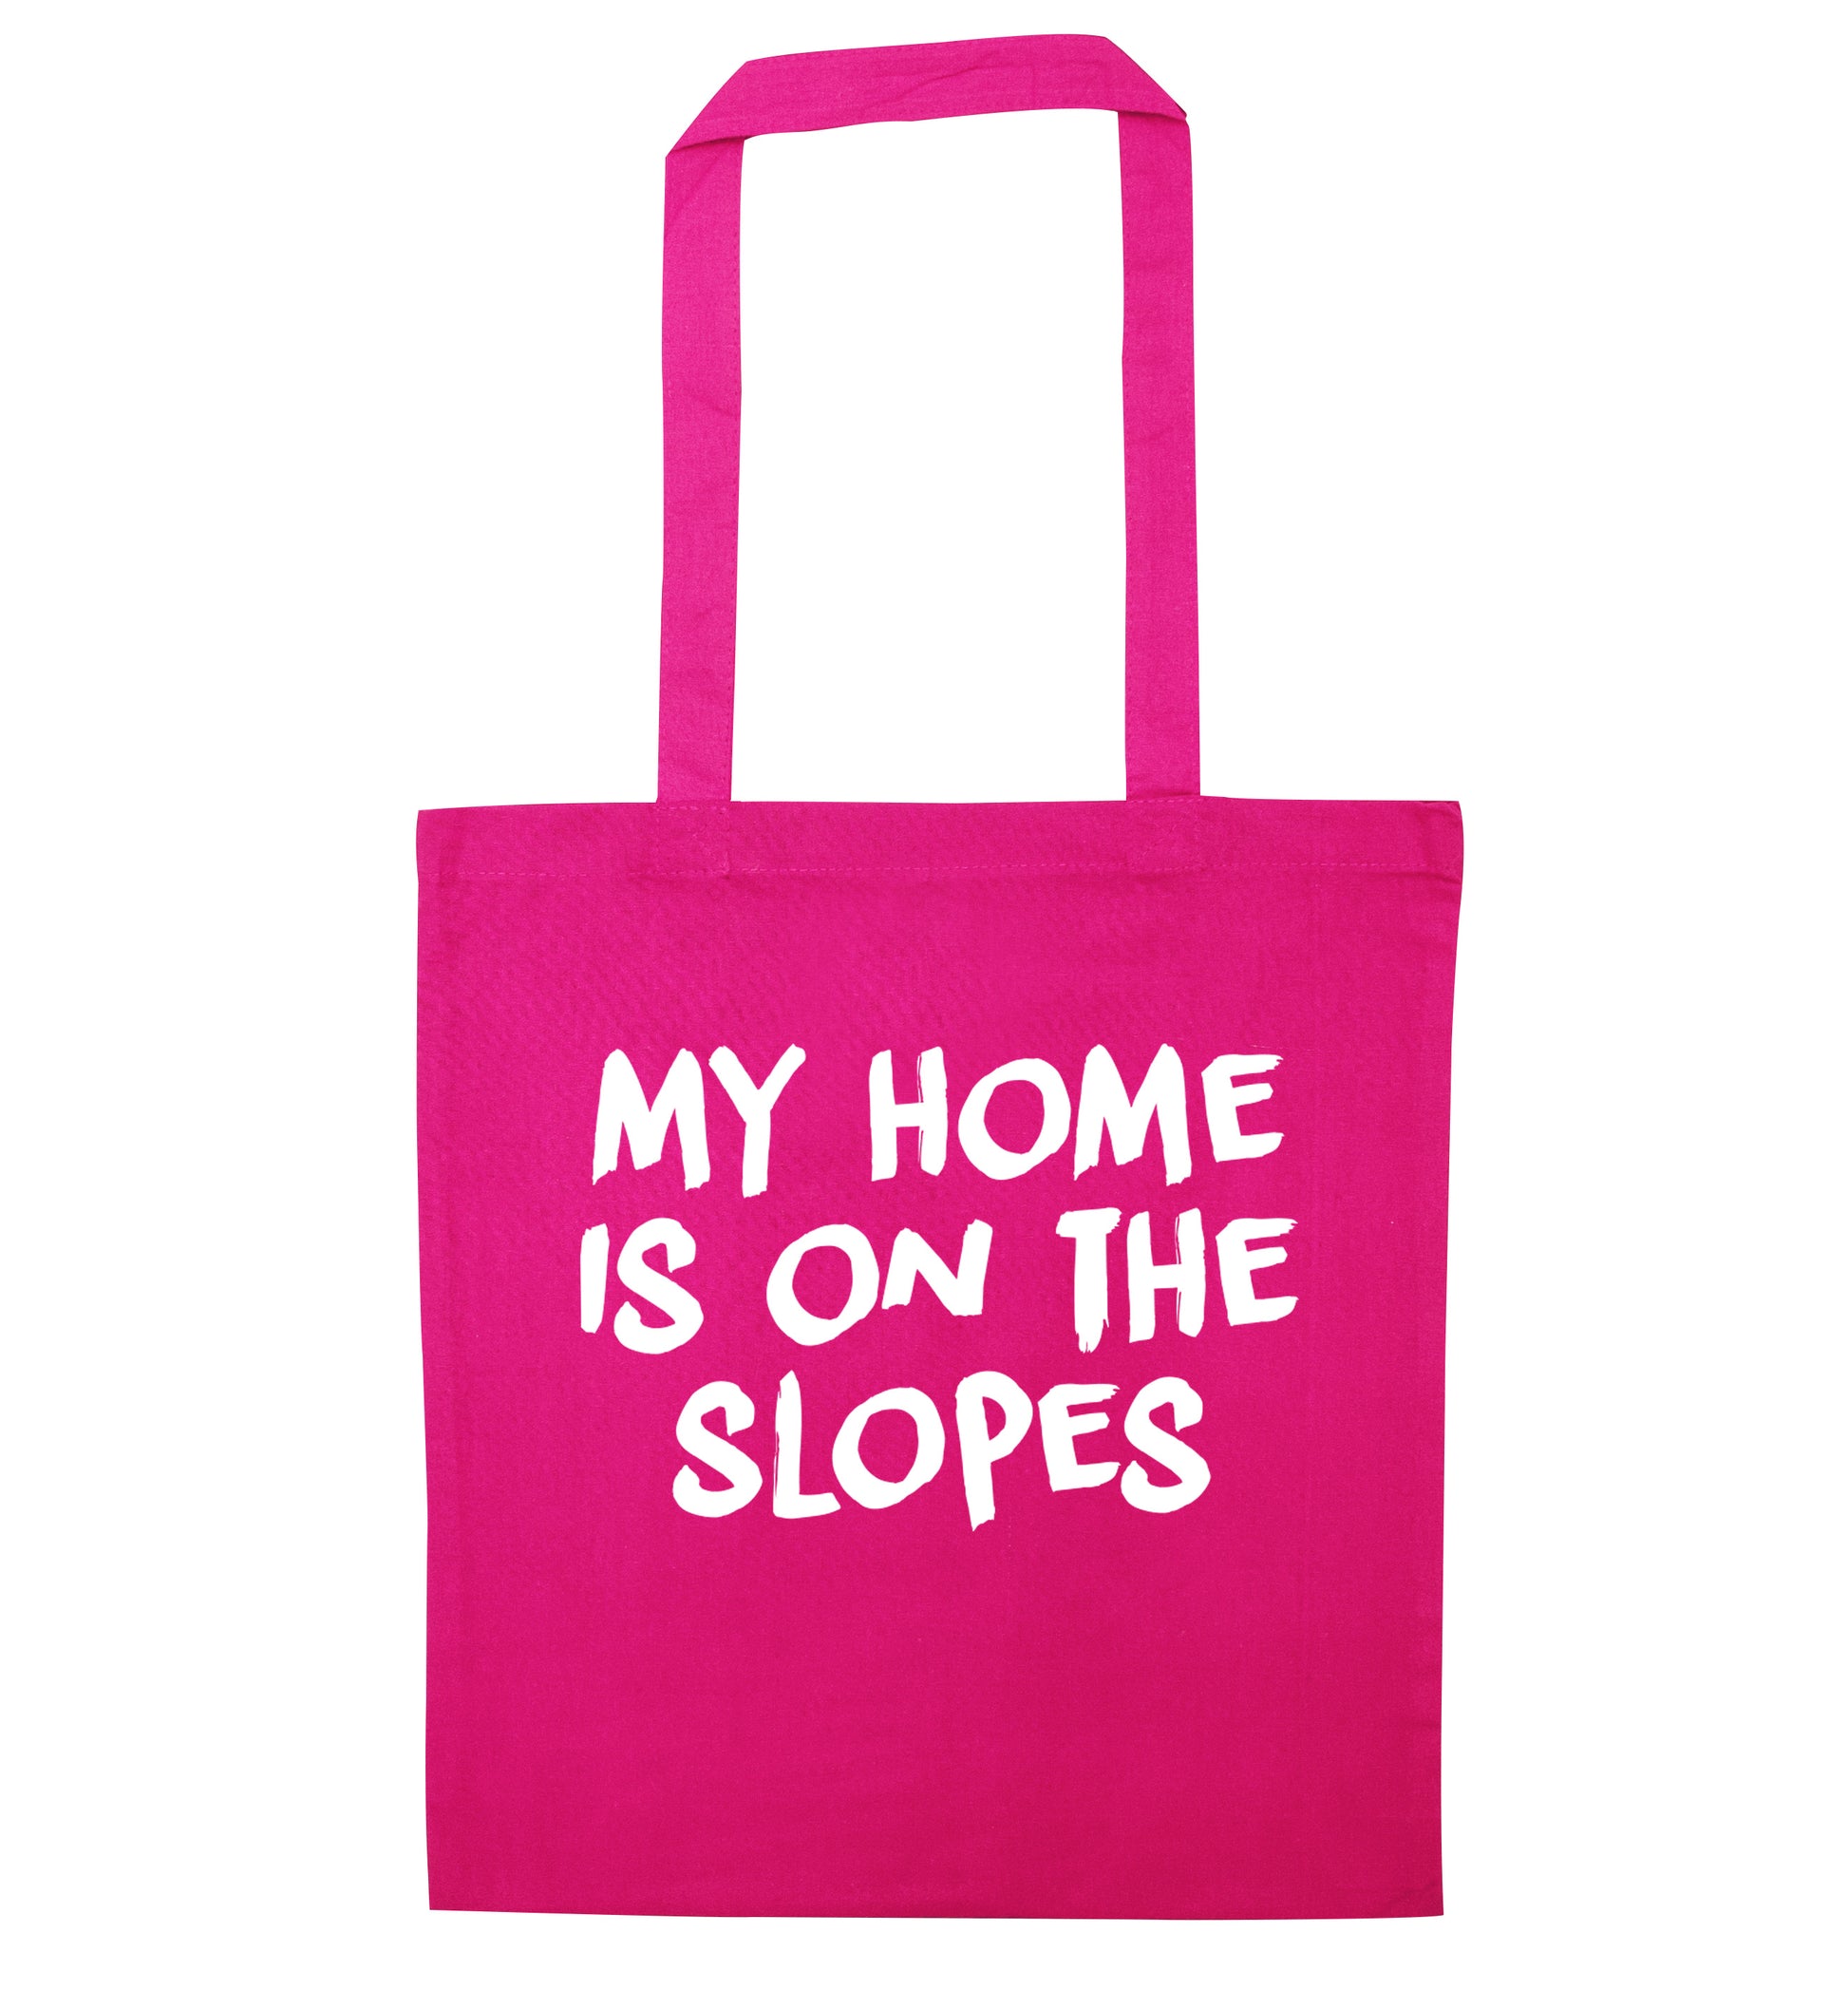 My home is on the slopes pink tote bag